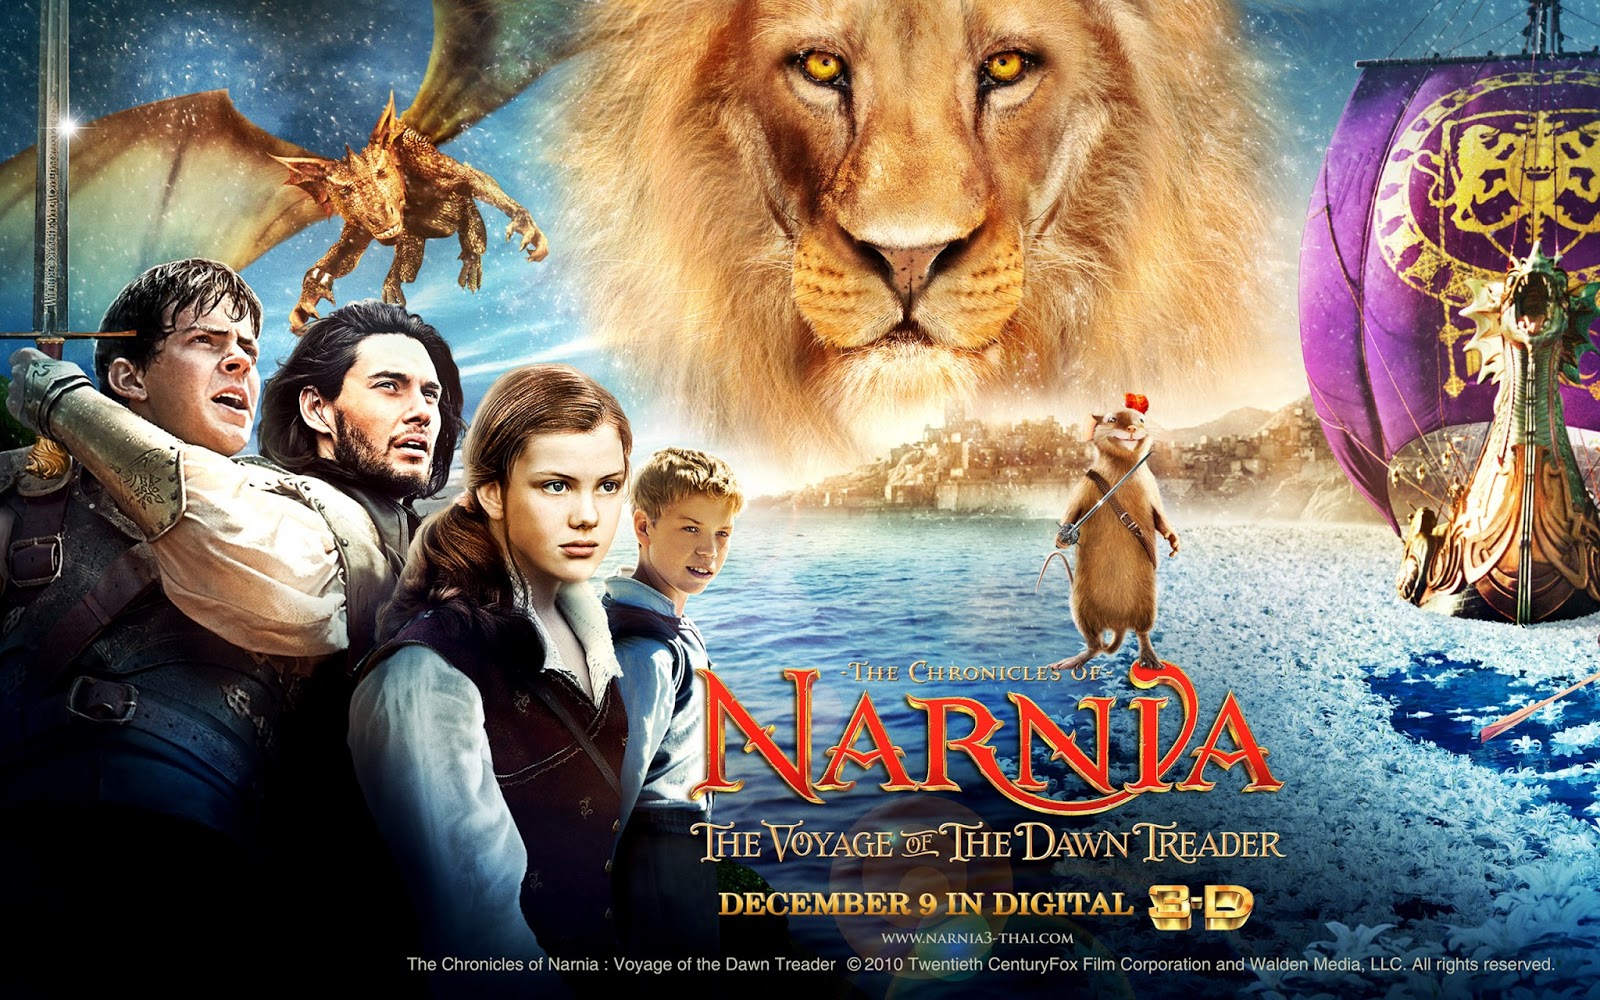 Christian symbolism in “Narnia: Voyage of the Dawn Treader” reveals  perverse truth of religious faith